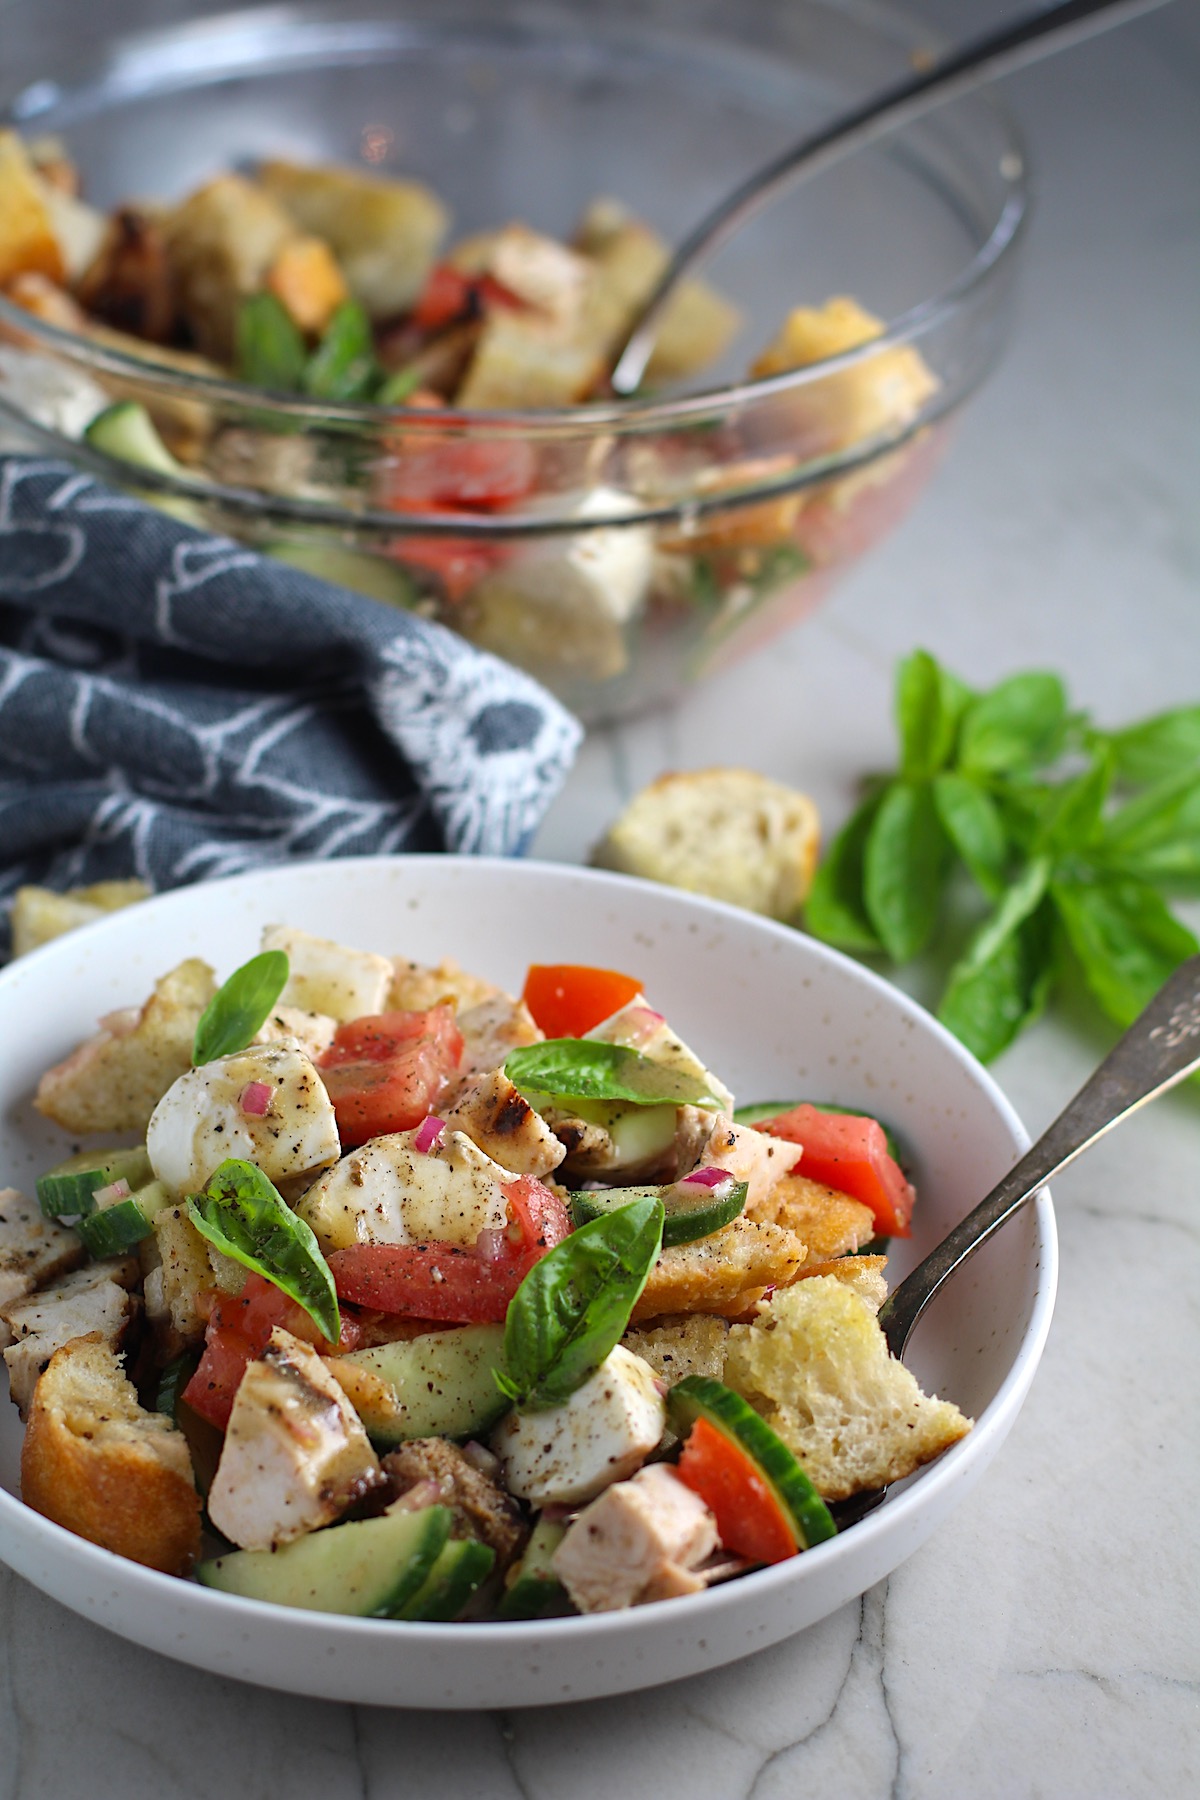 Chicken Panzanella Salad Recipe in a bowl with fork.  It has Toasted bread cubes, chicken, tomatoes, cucumber, basil, and mozzarella.  Serving bowl in back